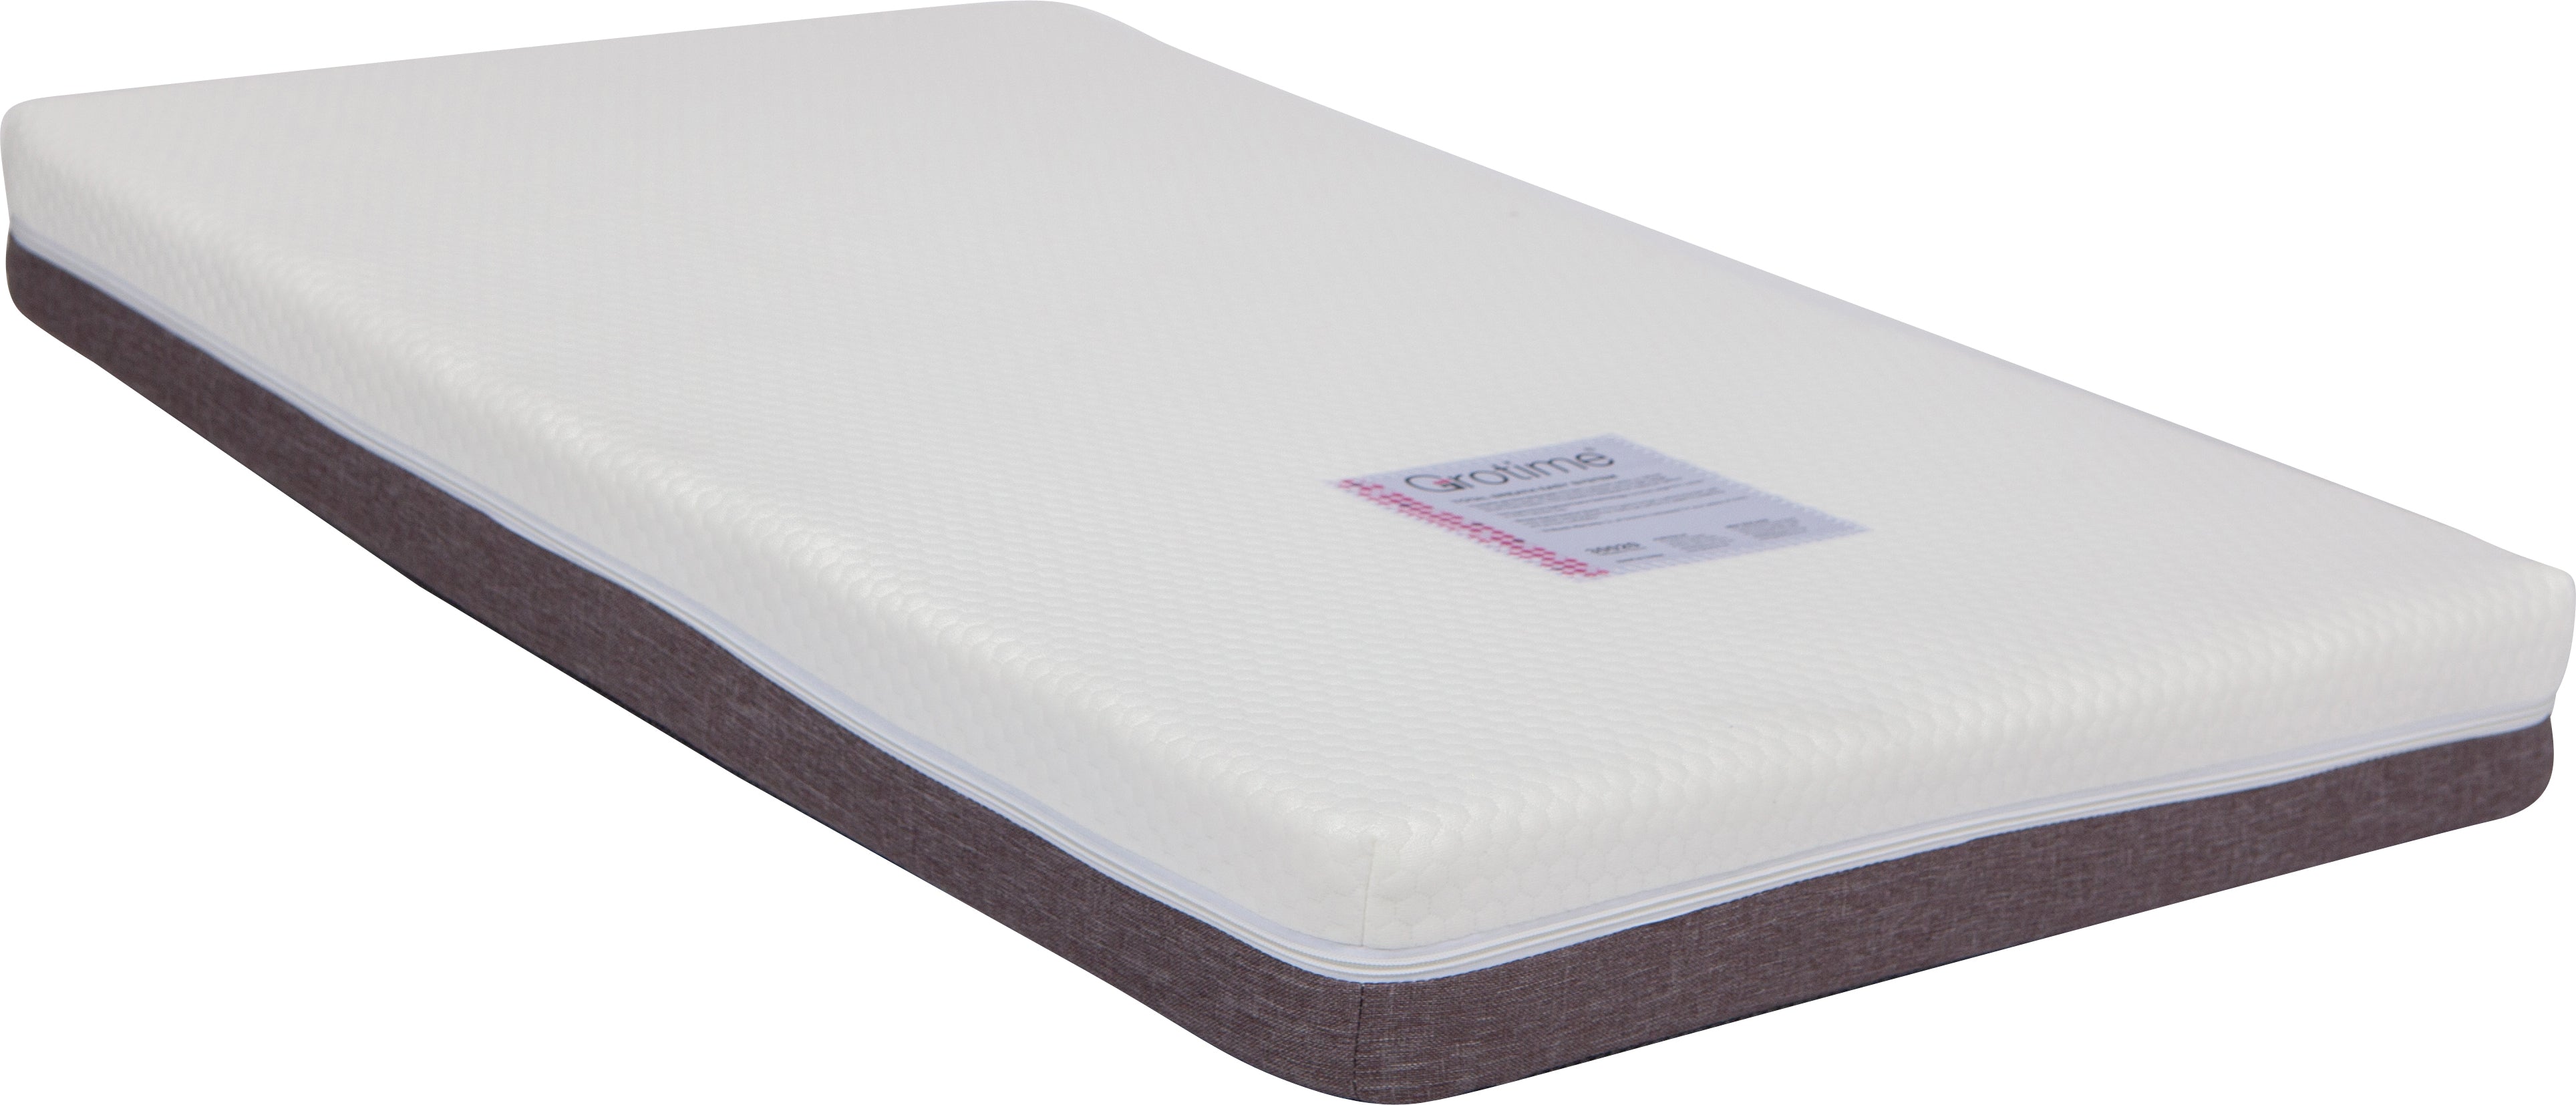 Grotime Lincoln Cot, Chest & Mattress setting. - Local pick up only